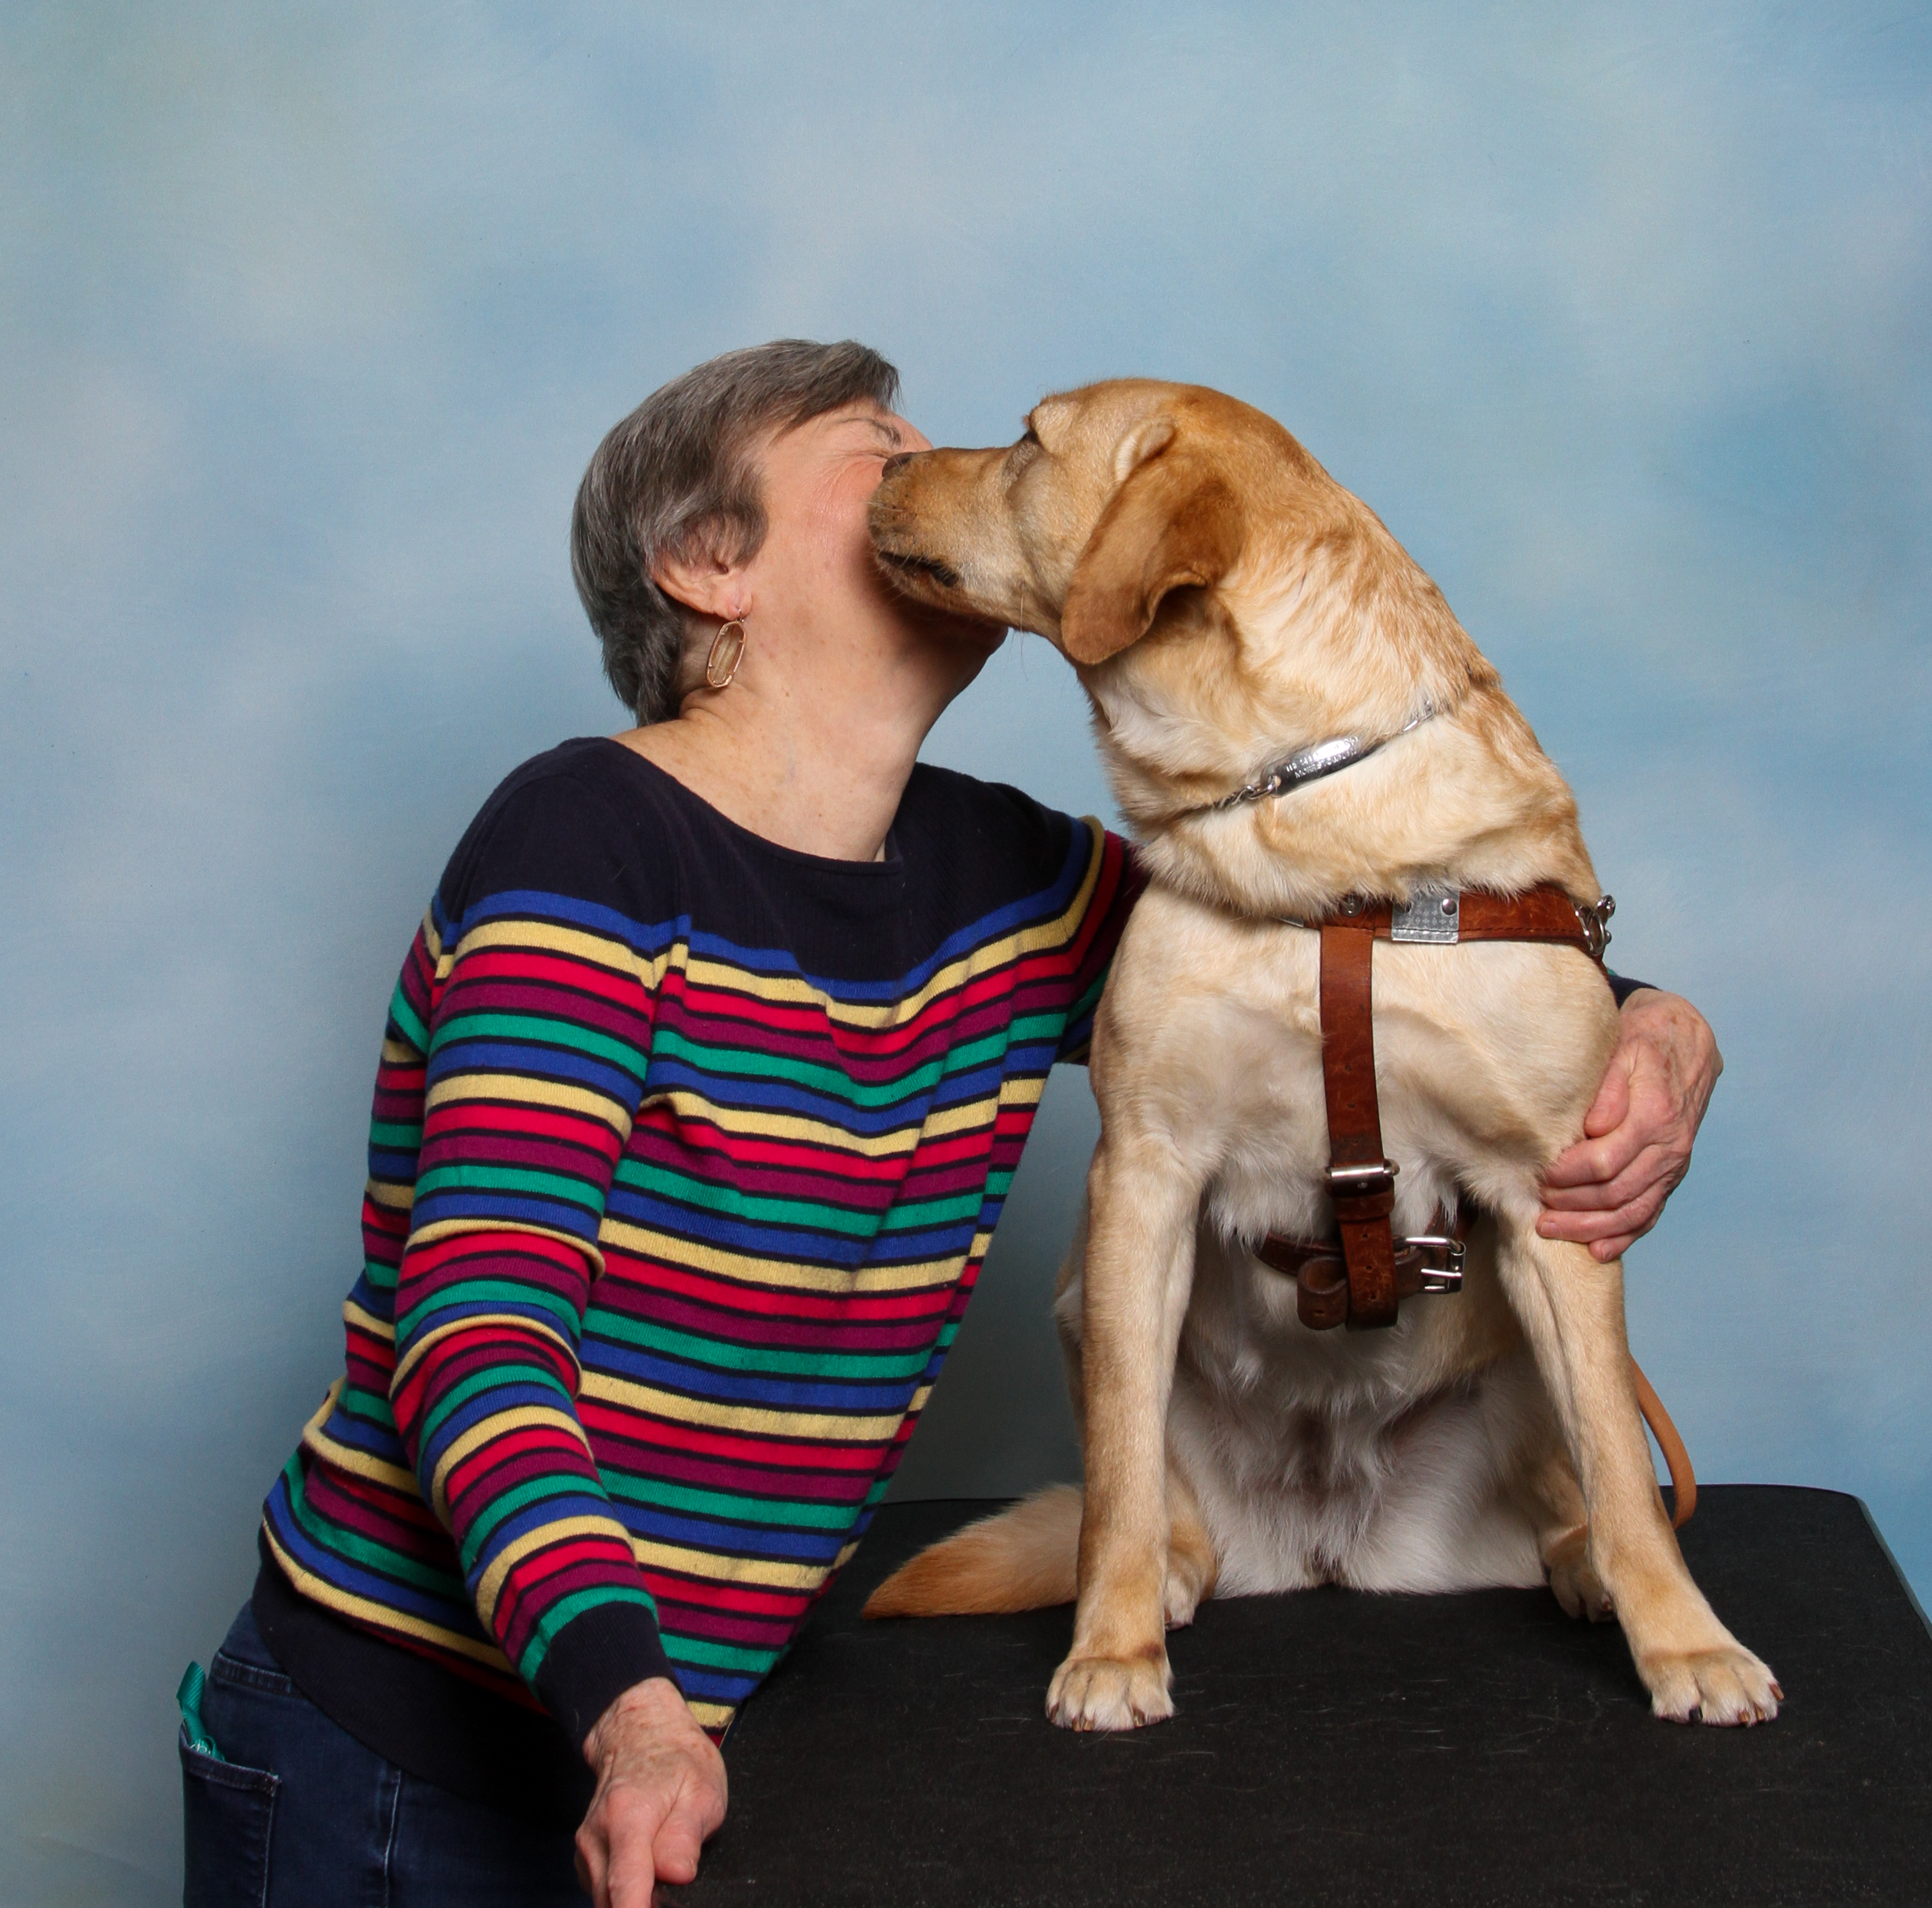 Seeing Eye graduate Susan poses for a portrait with her new yellow Lab Seeing Eye dog Goldy. Susan’s head is tilted back and up as Goldy turns to lick her face.